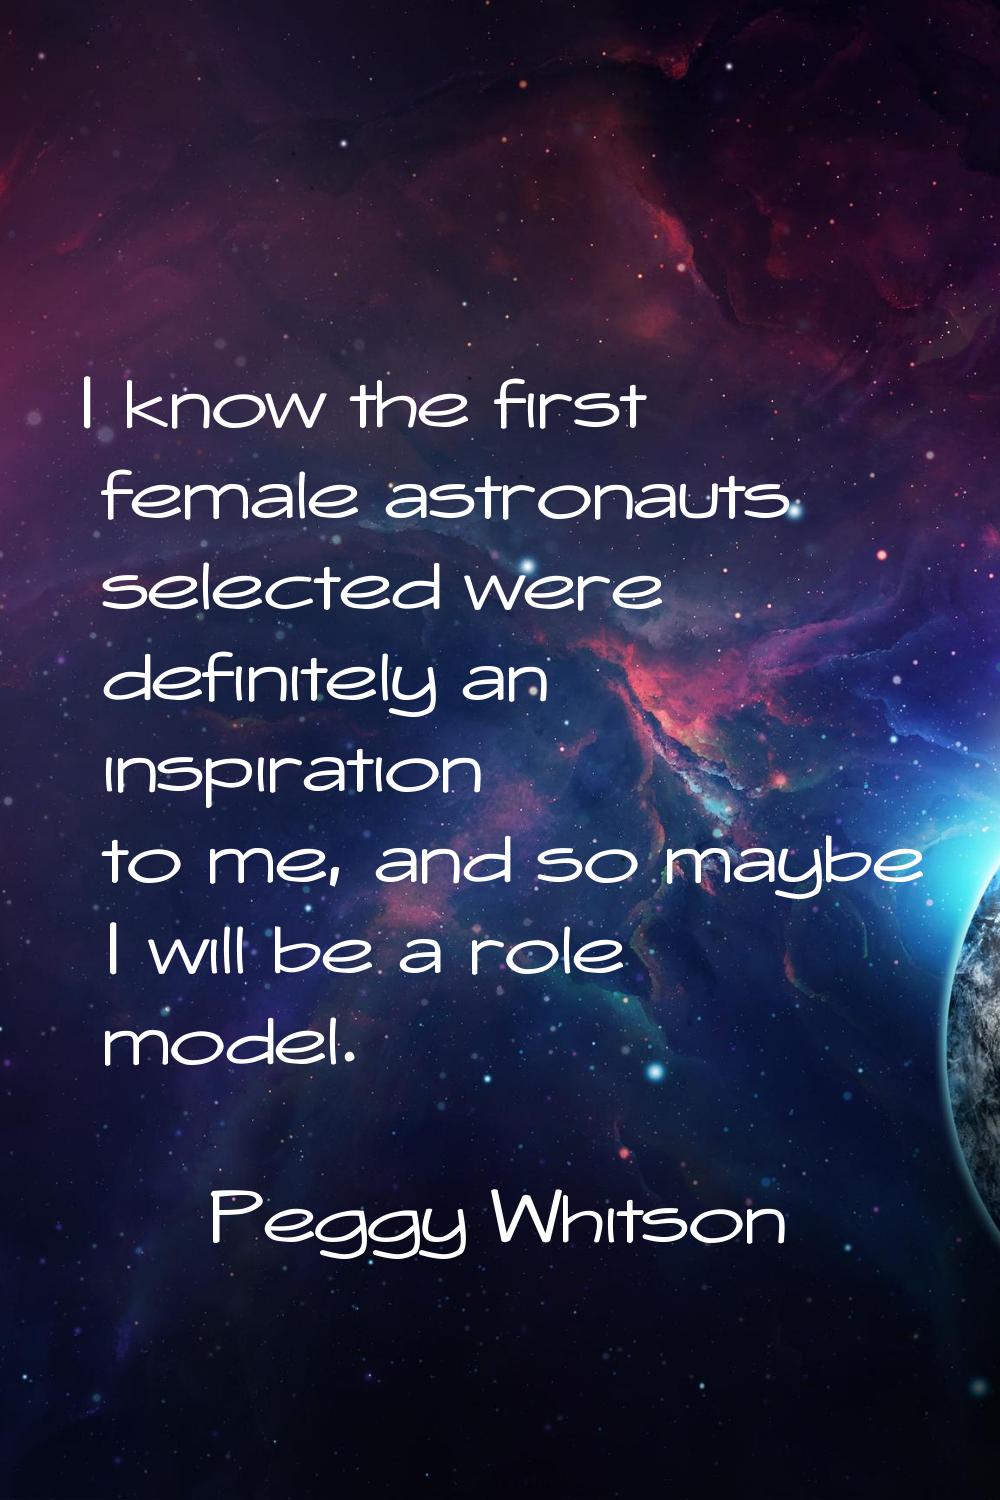 I know the first female astronauts selected were definitely an inspiration to me, and so maybe I wi